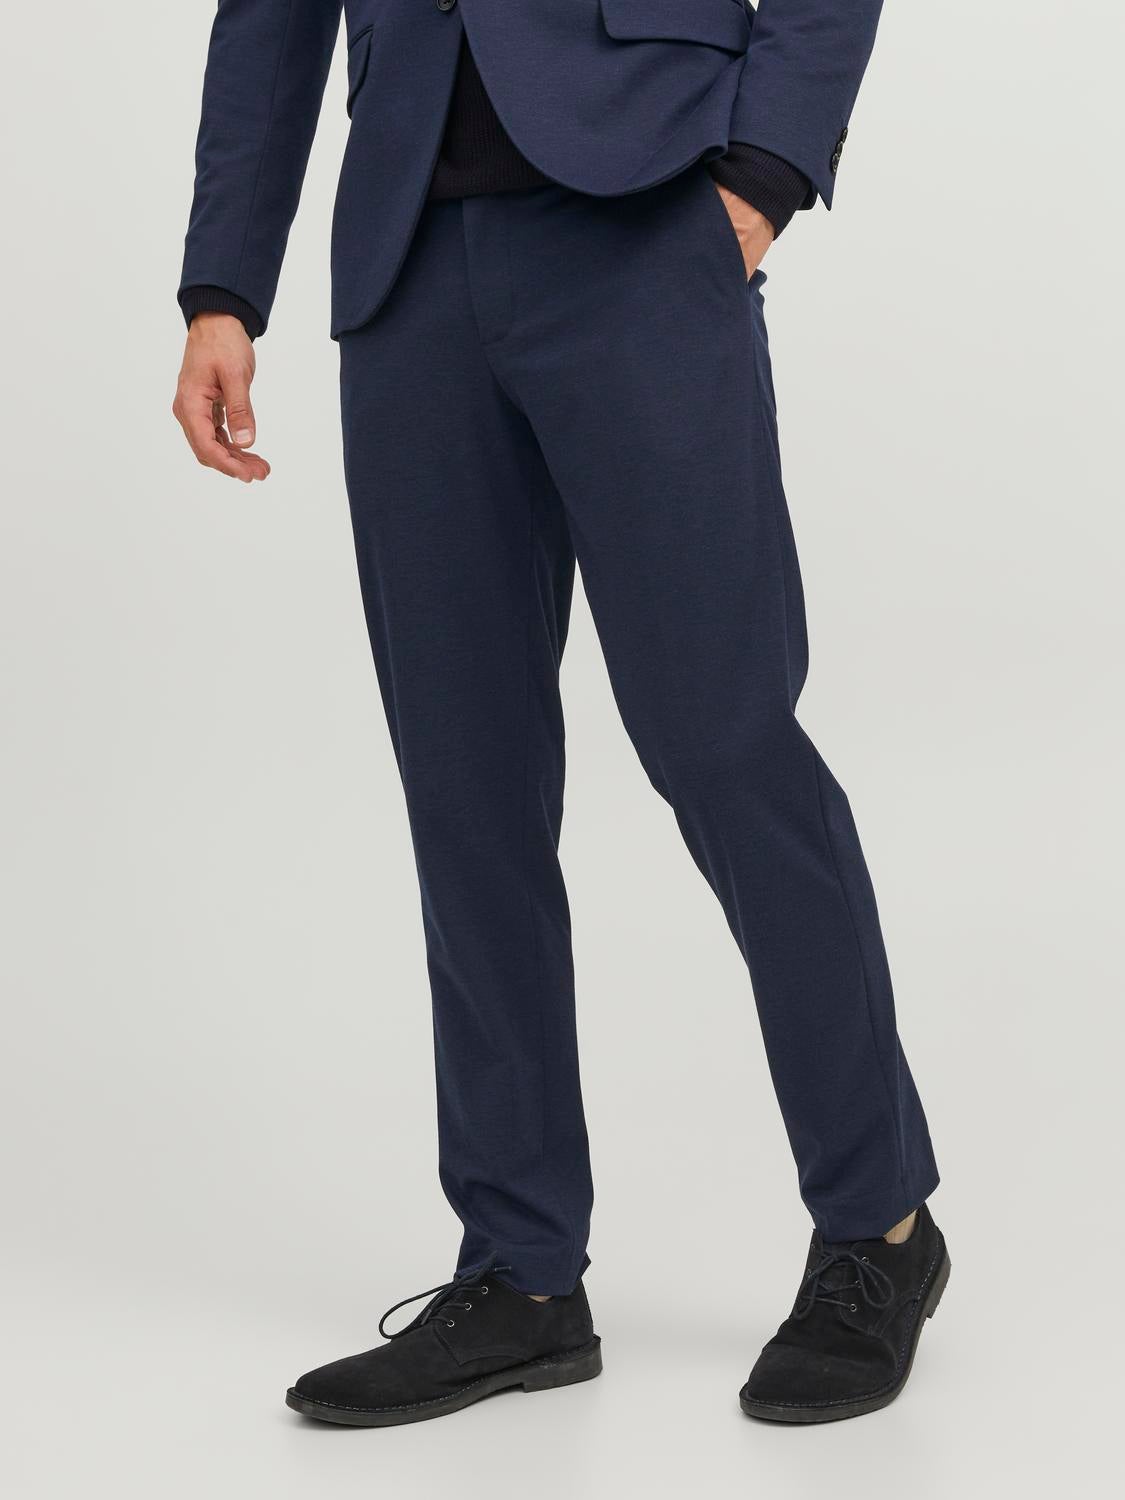 Taylor & Wright Cooper Navy Tailored Fit Suit Trousers - Matalan